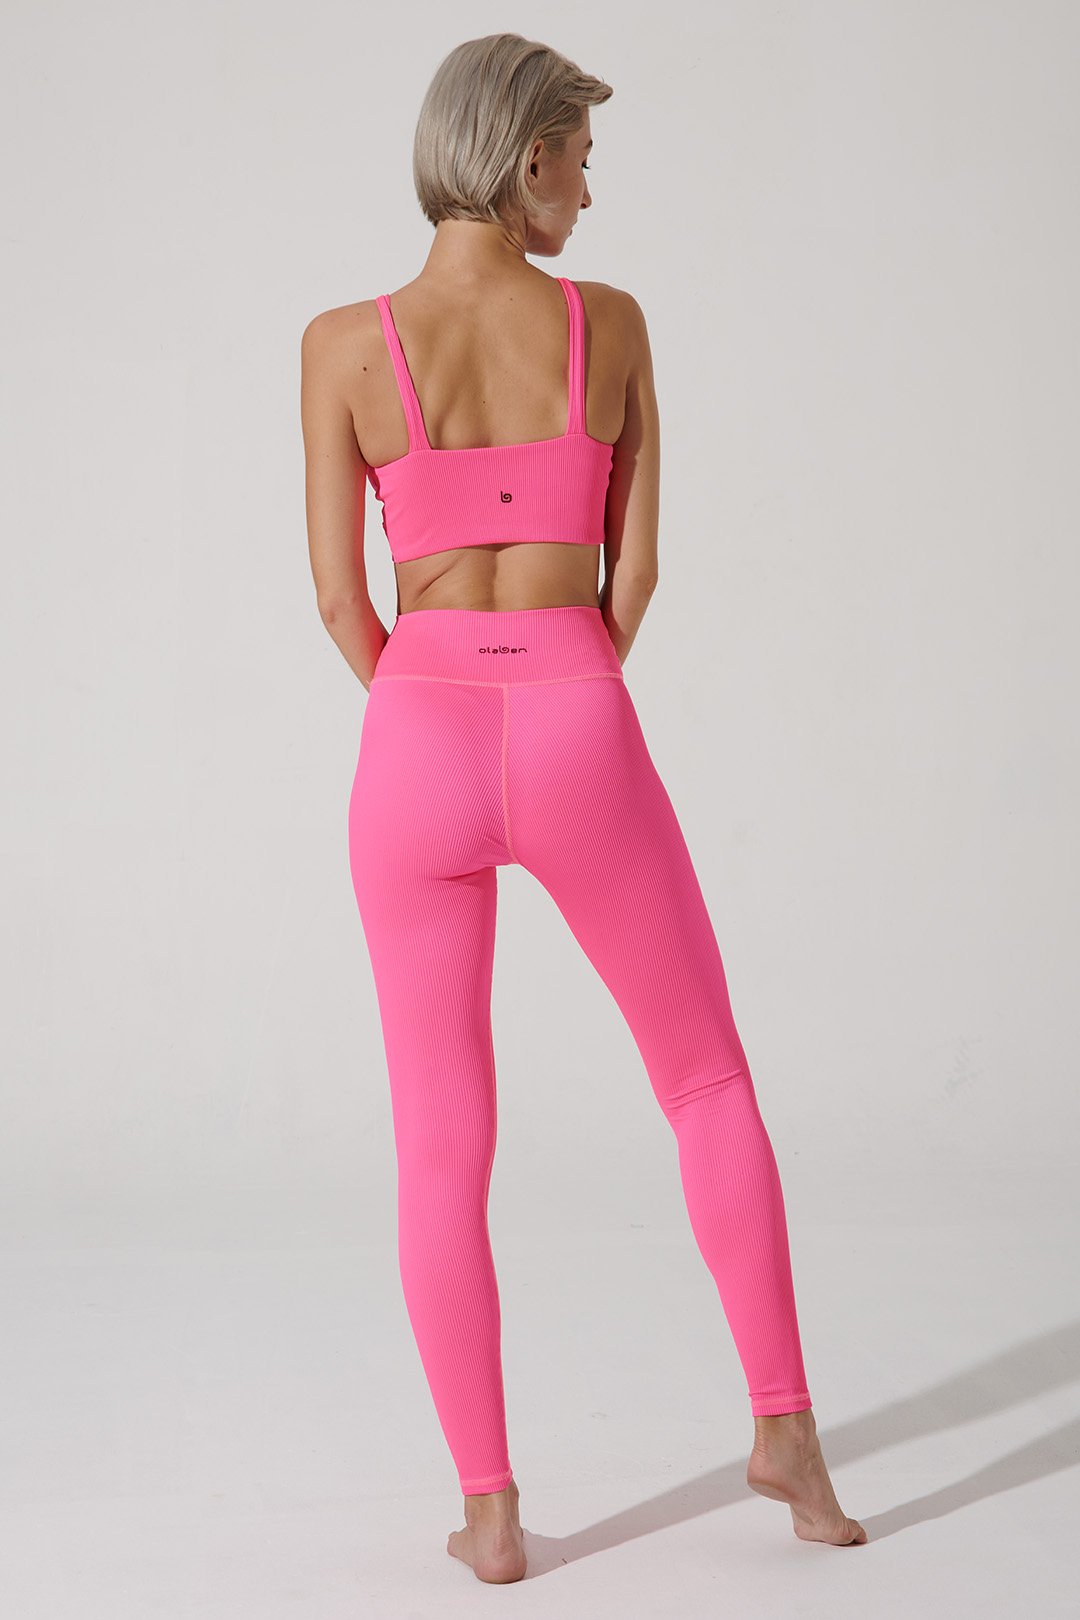 Hot pink high-waist leggings for women, perfect for a stylish and vibrant workout ensemble.